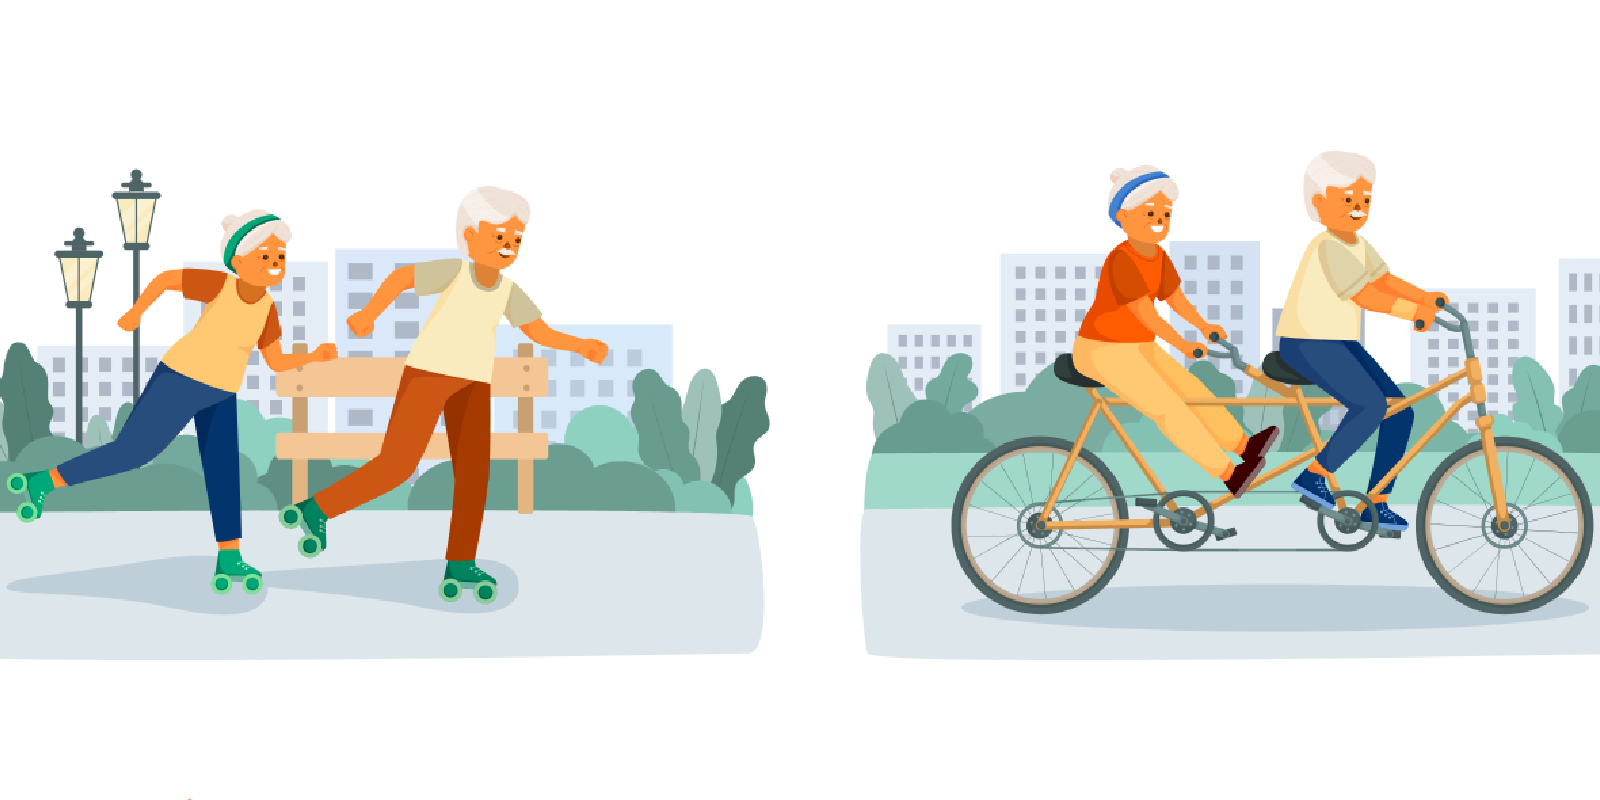 10 best exercises for senior adults : Benefits, Do's & Don't